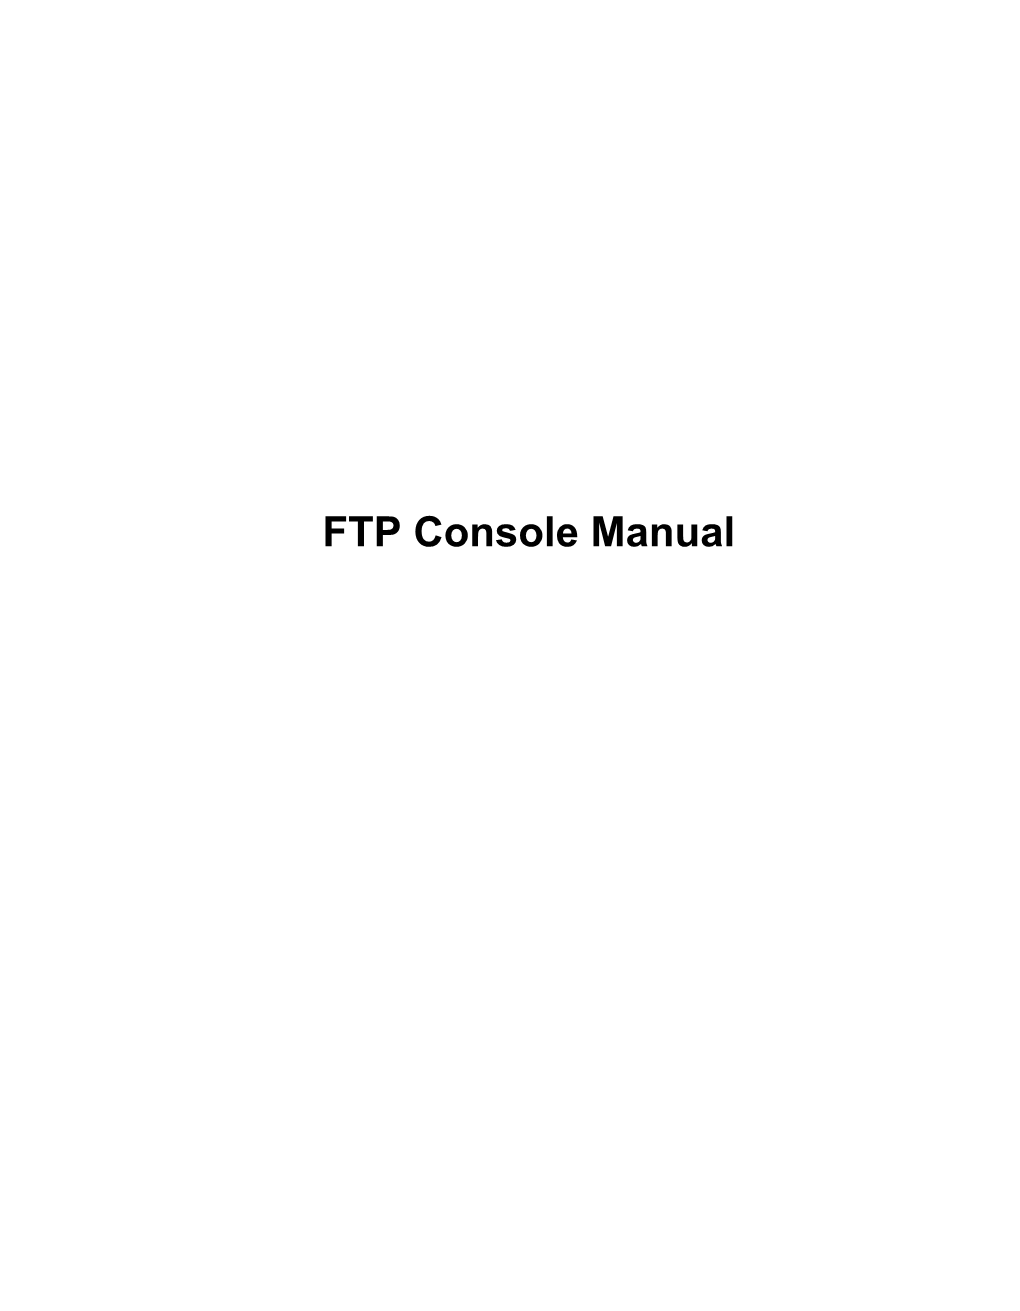 FTP Console Manual Table of Contents